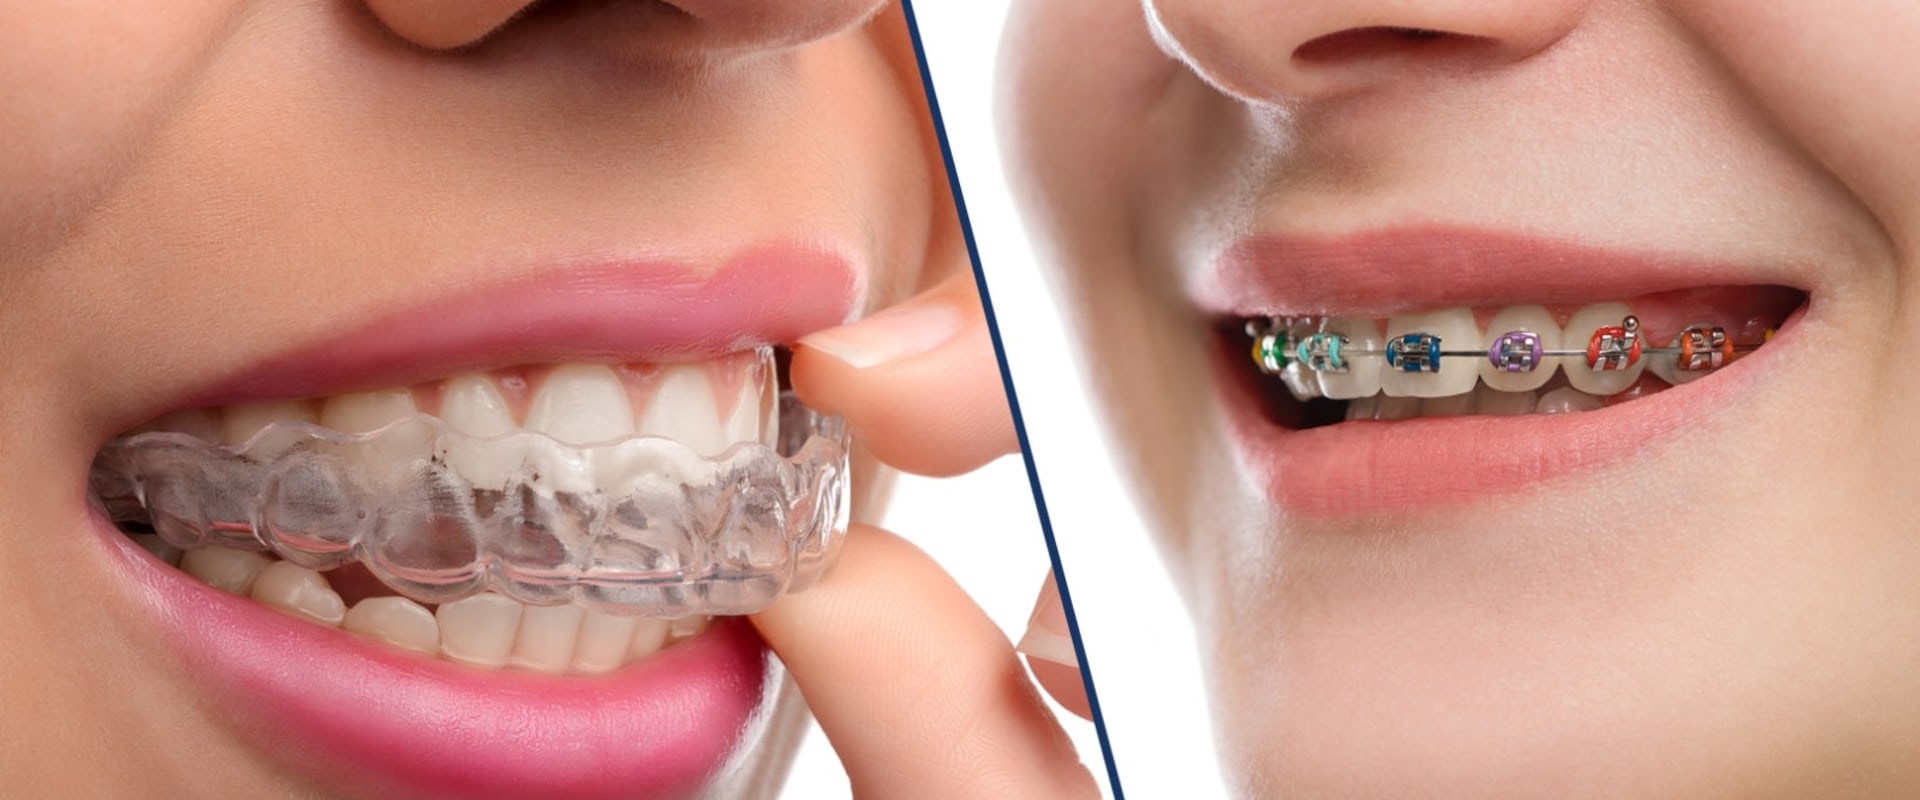 Is Invisalign or Braces More Effective for Straightening Teeth?